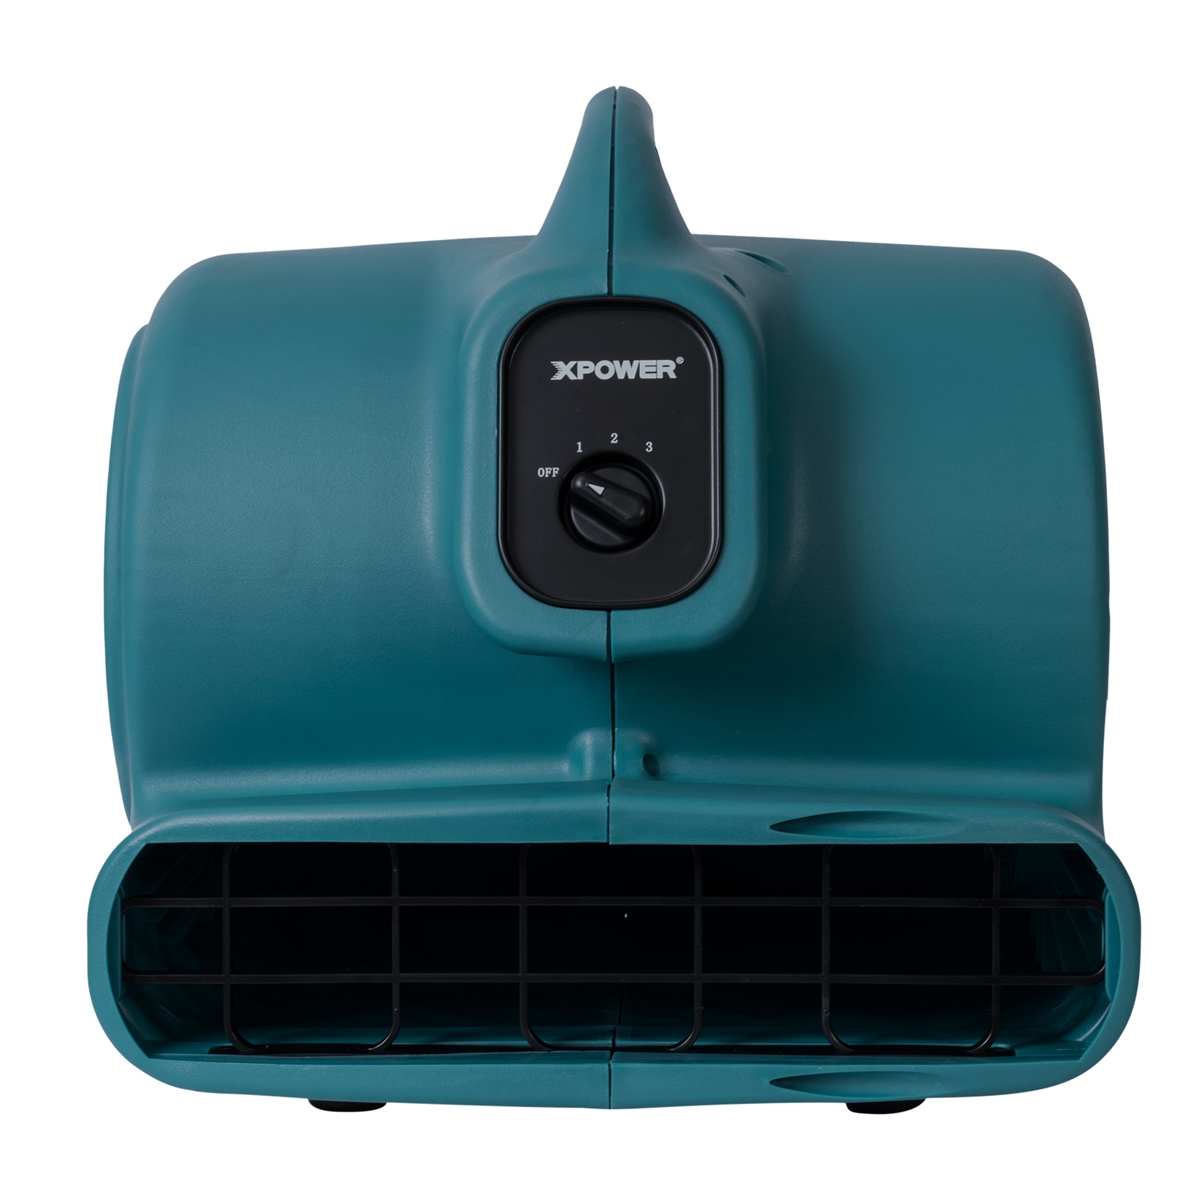 XPOWER P-630HC 1/2 HP carpet drying fan, with Handle and Wheels